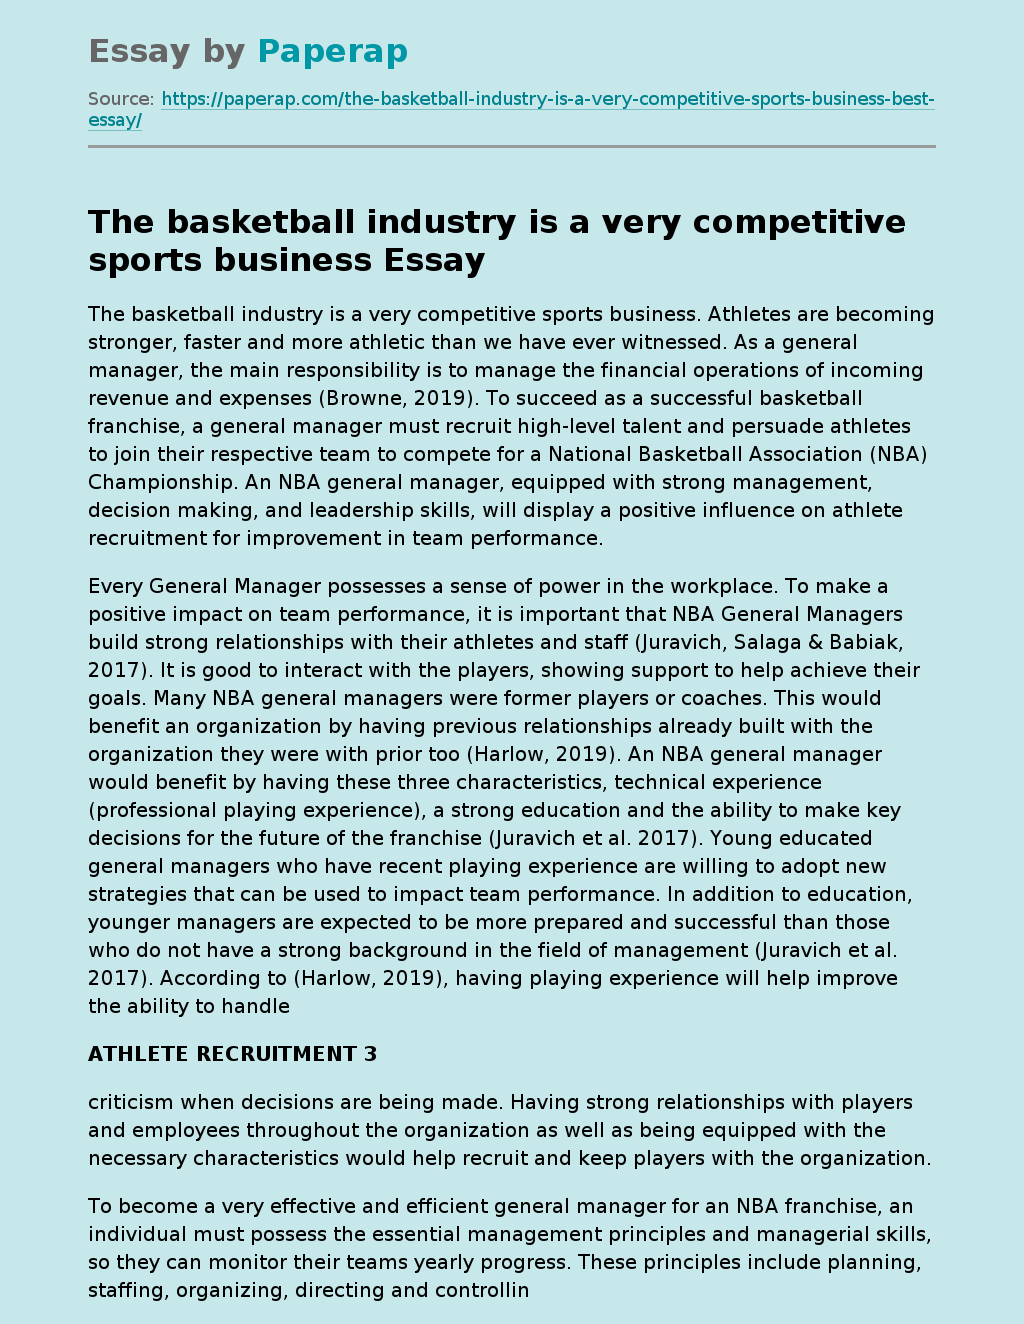 The Basketball Industry Is a Very Competitive Sports Business